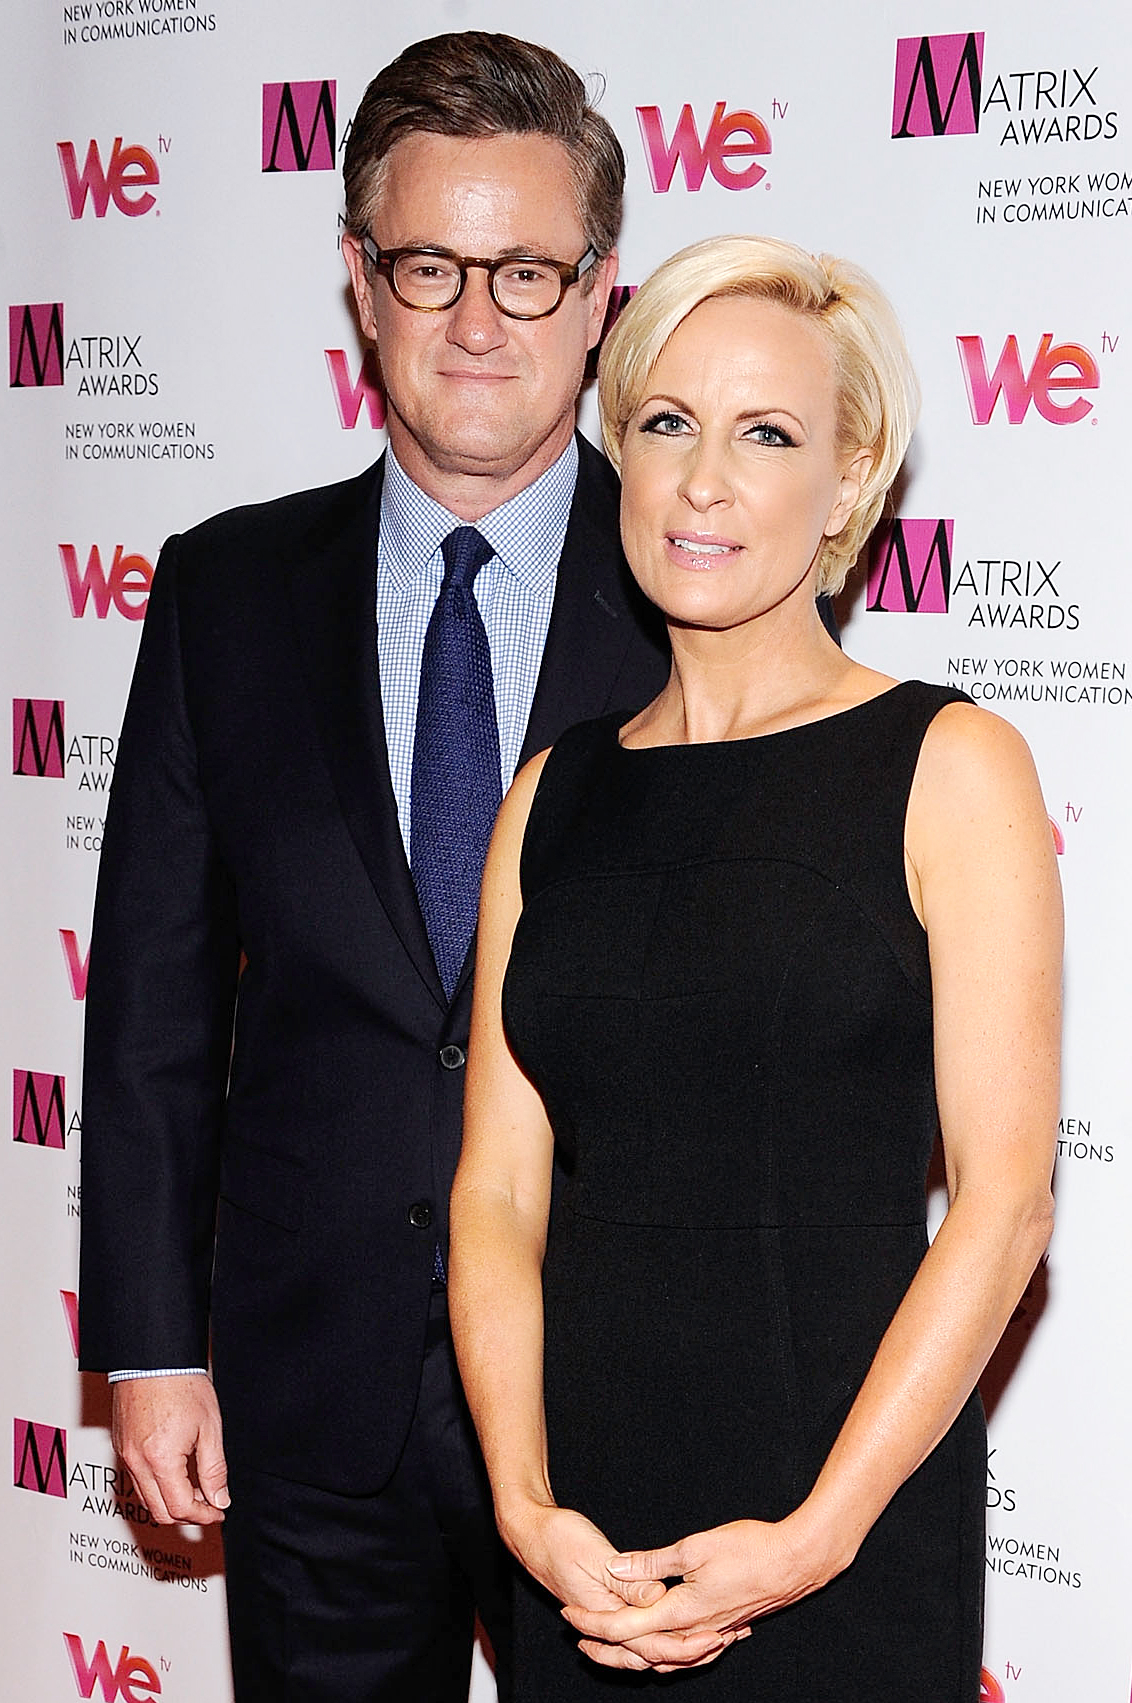 Morning Joes Mika Joe Say Trump Offered To Officiate Their Wedding